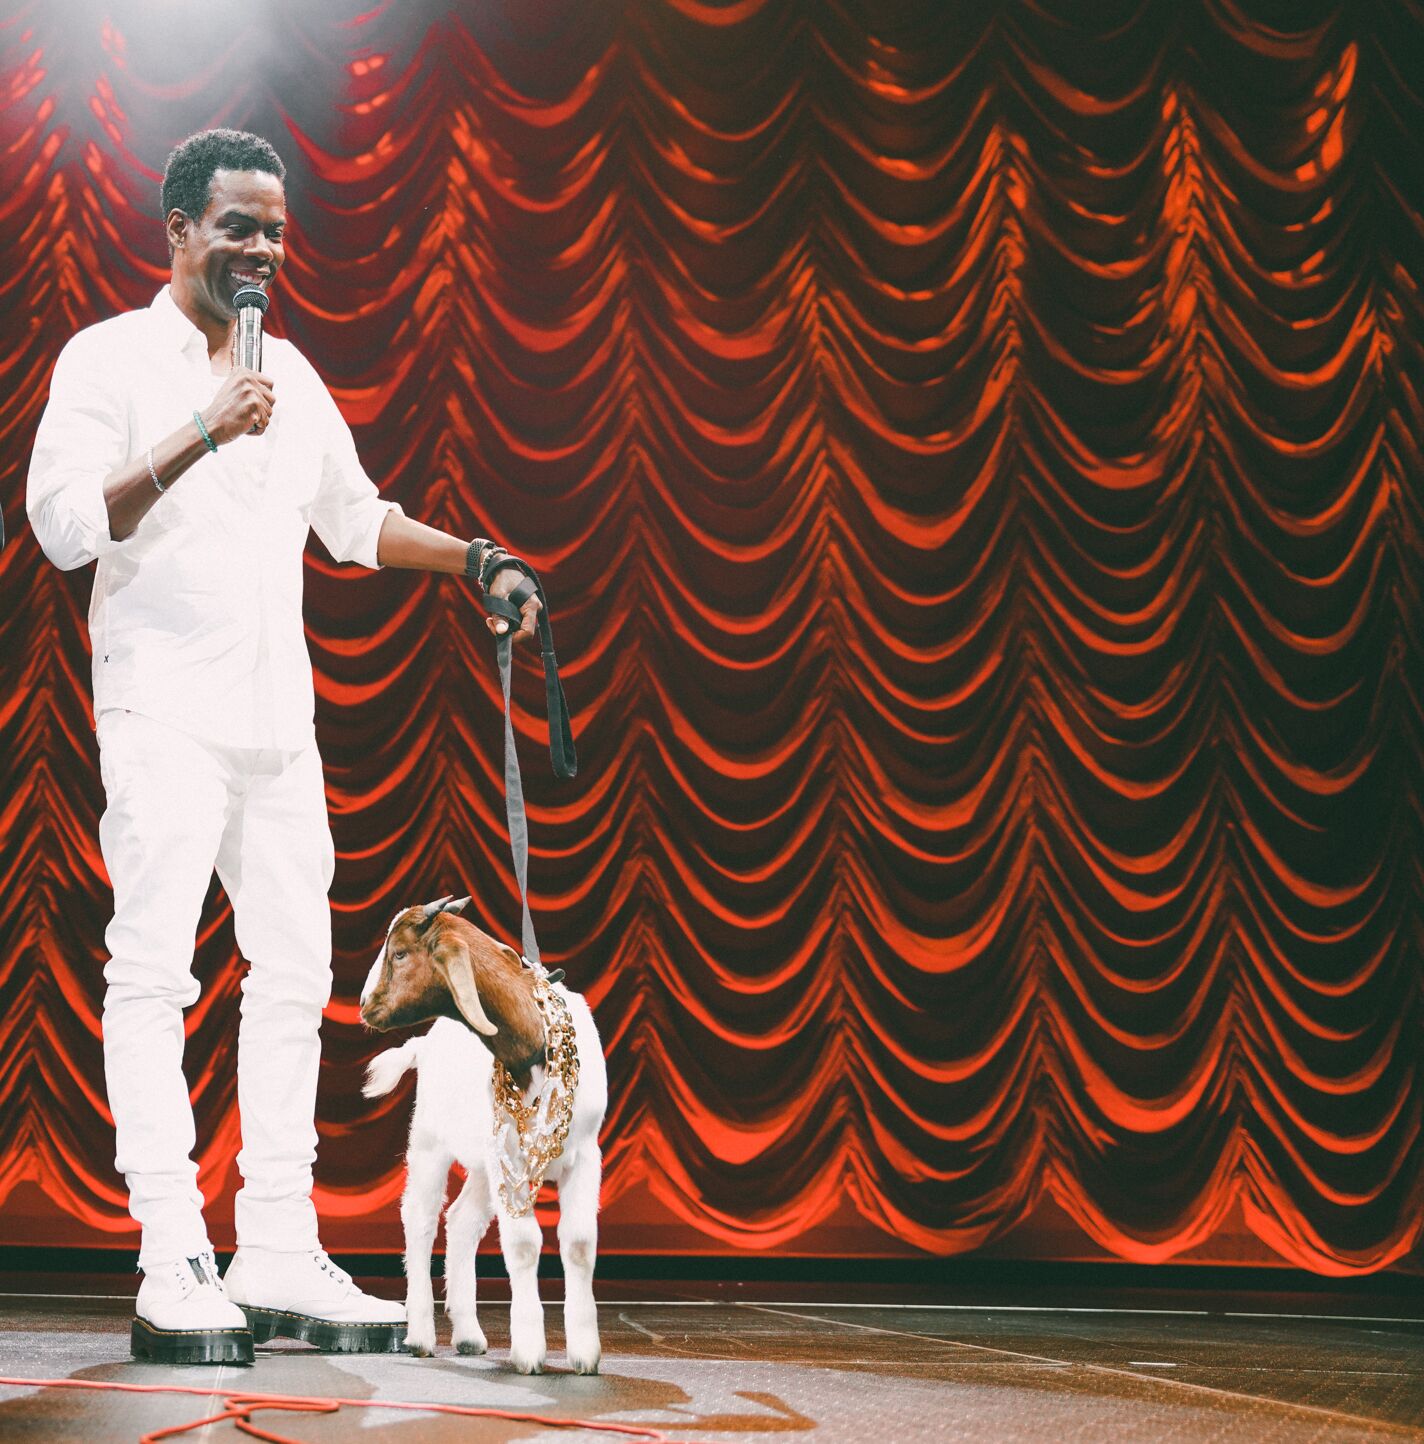 Chris Rock to Bro V. Wade: 5 Comedy specials and events we're excited about in 2023